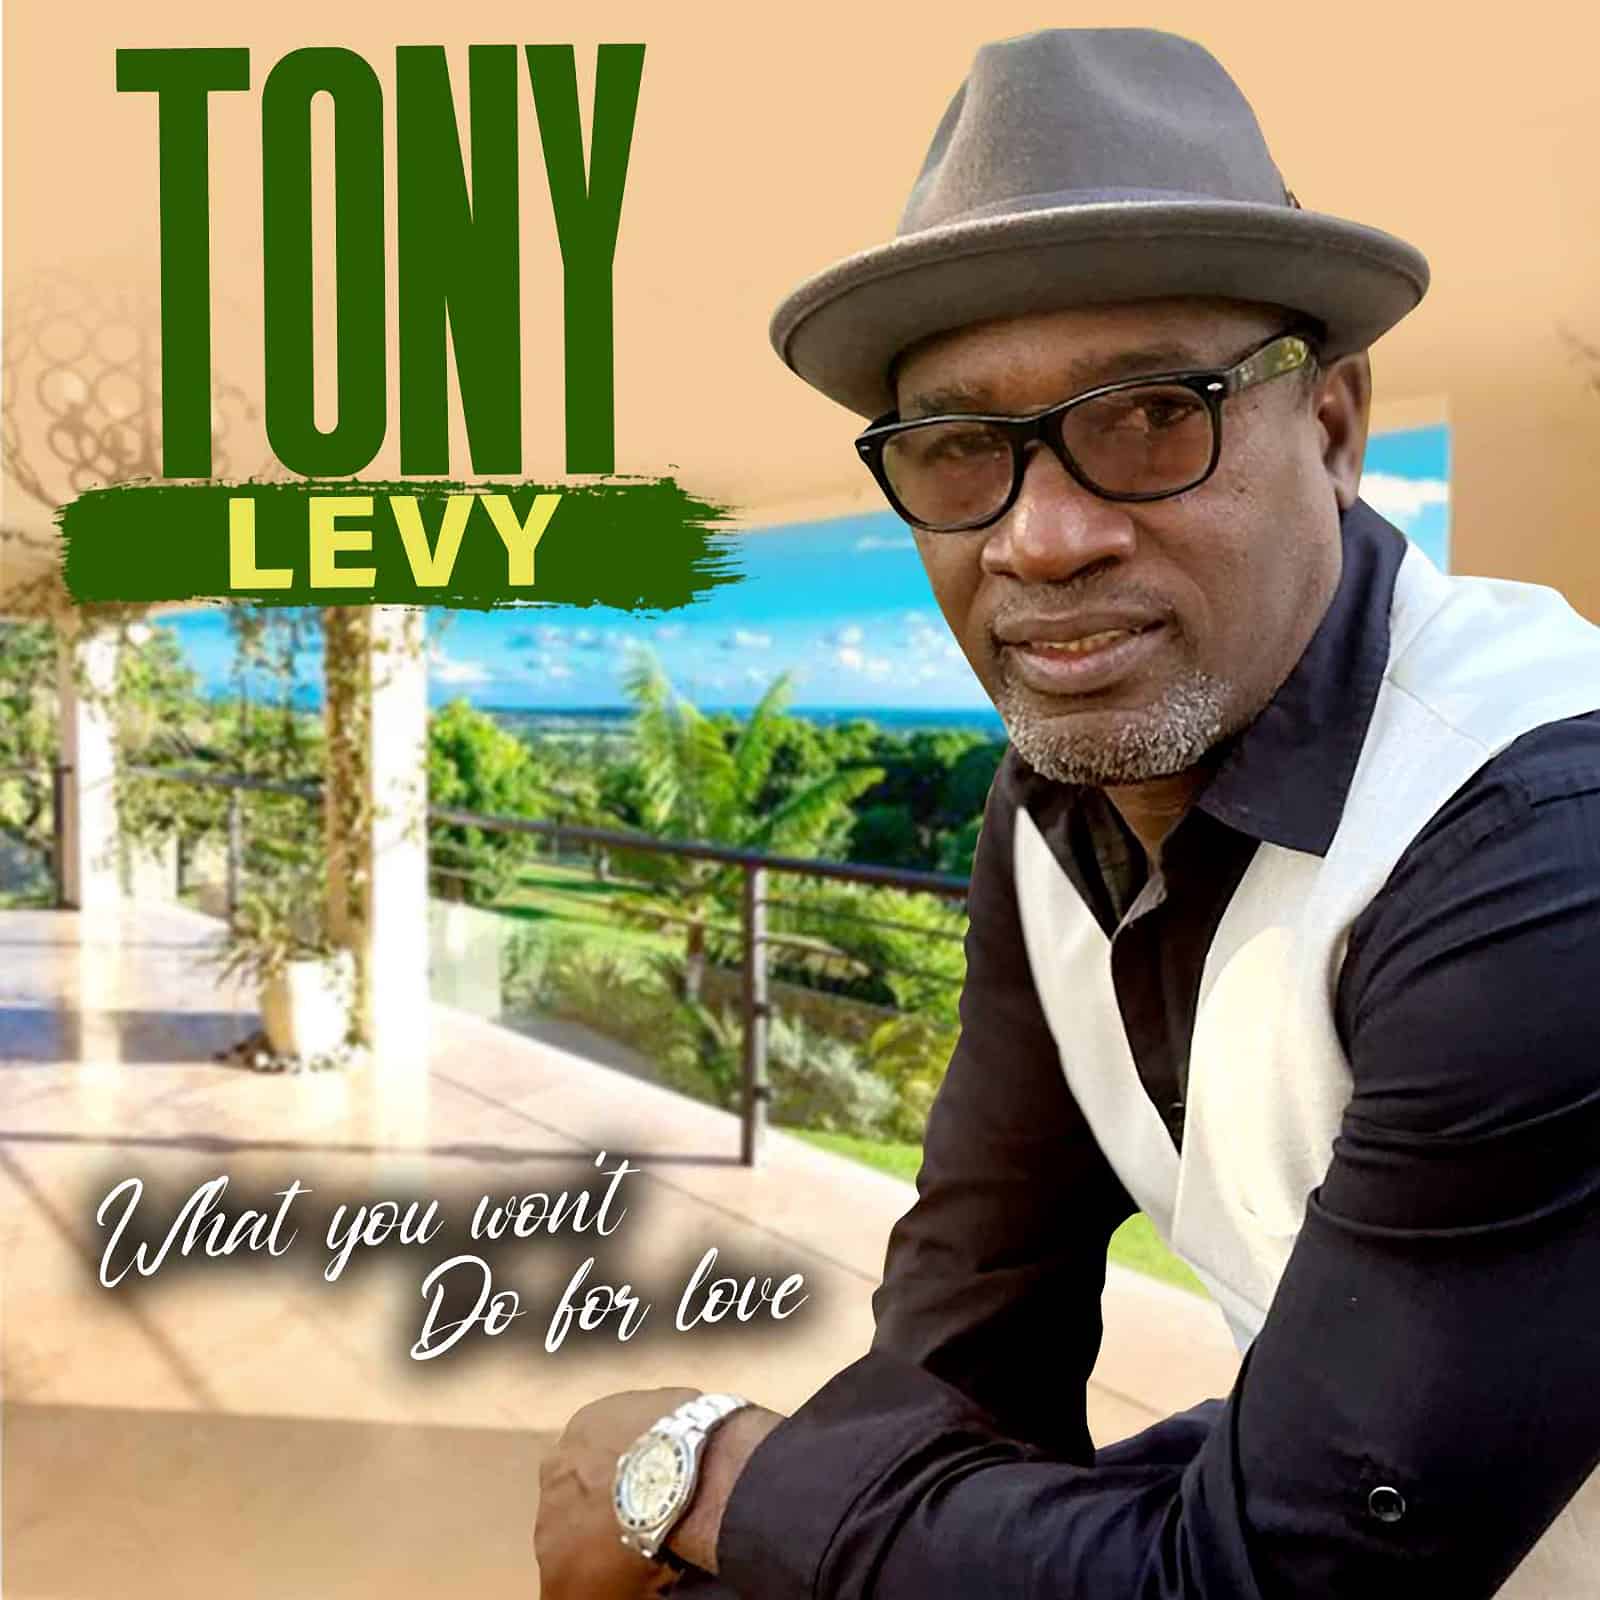 Tony Levy - What you won